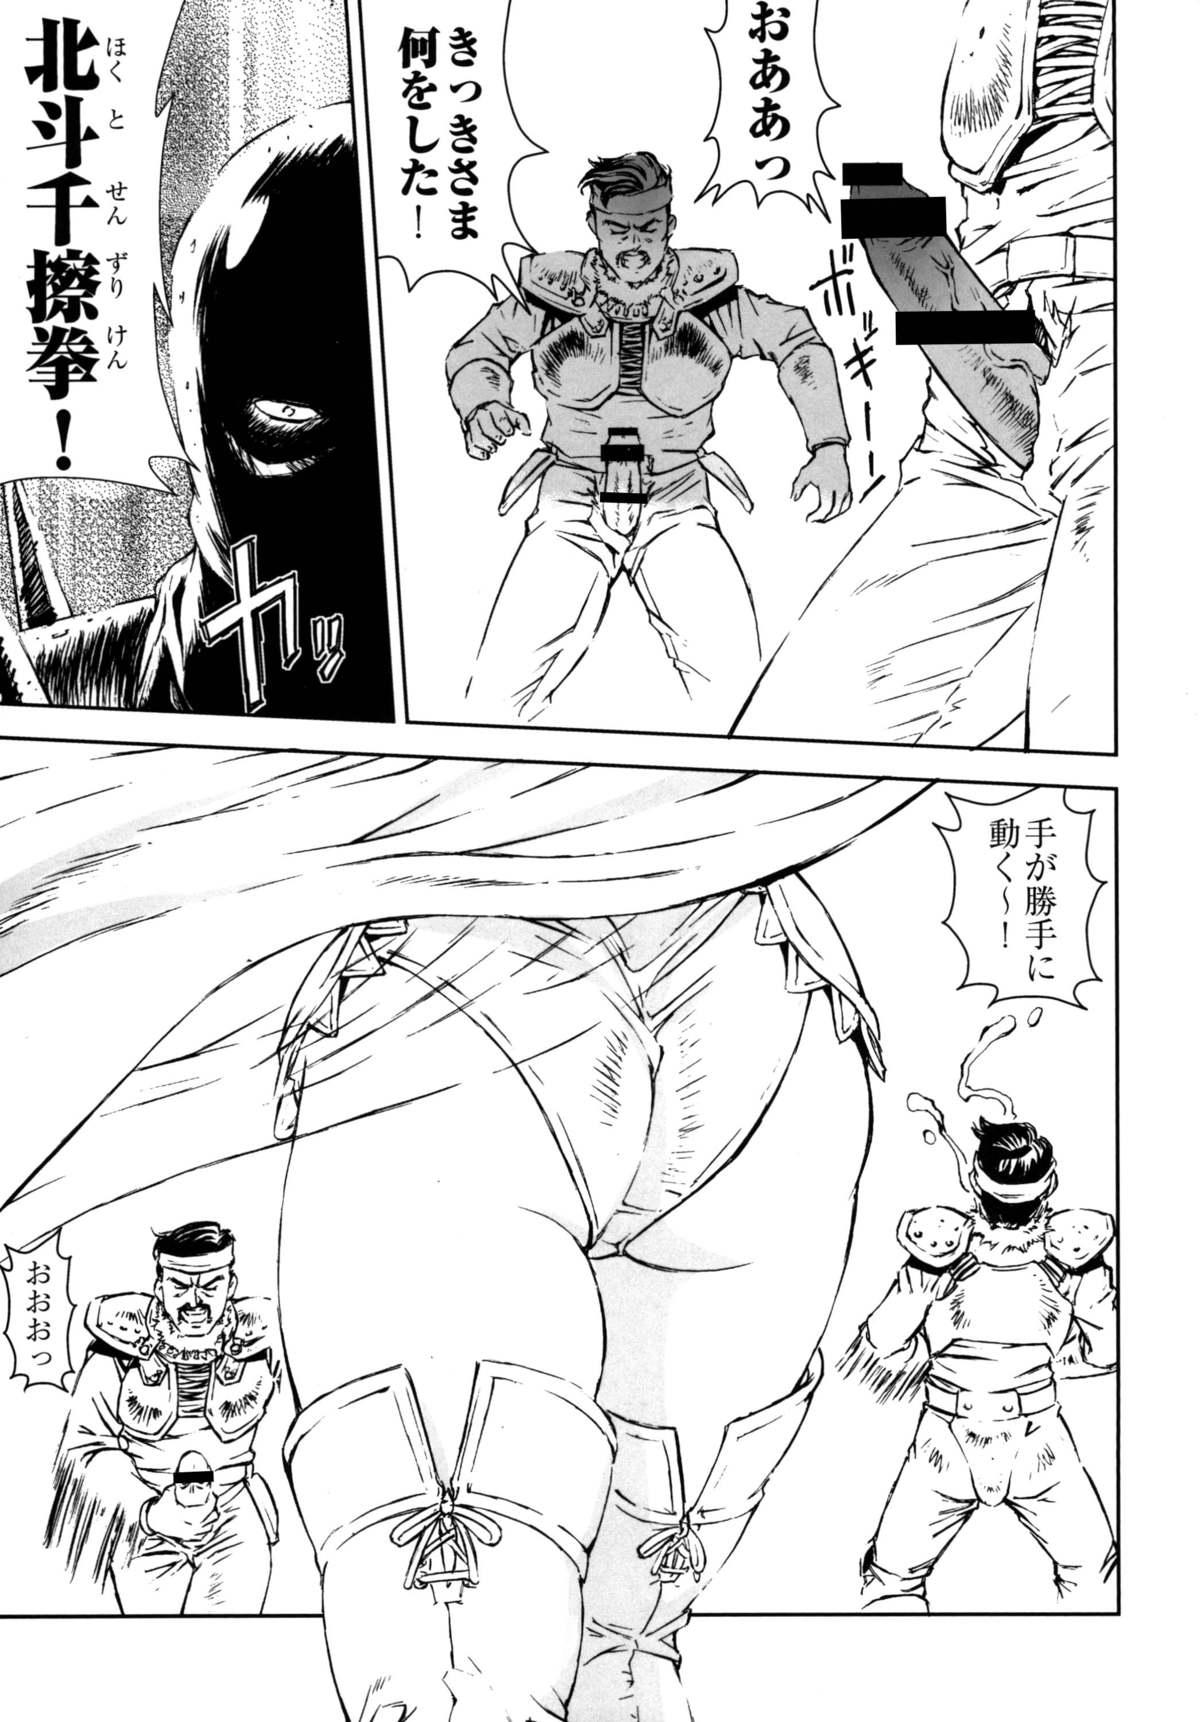 Hungarian HOT BITCH JUMP 2 - Kochikame Fist of the north star Sweet - Page 6